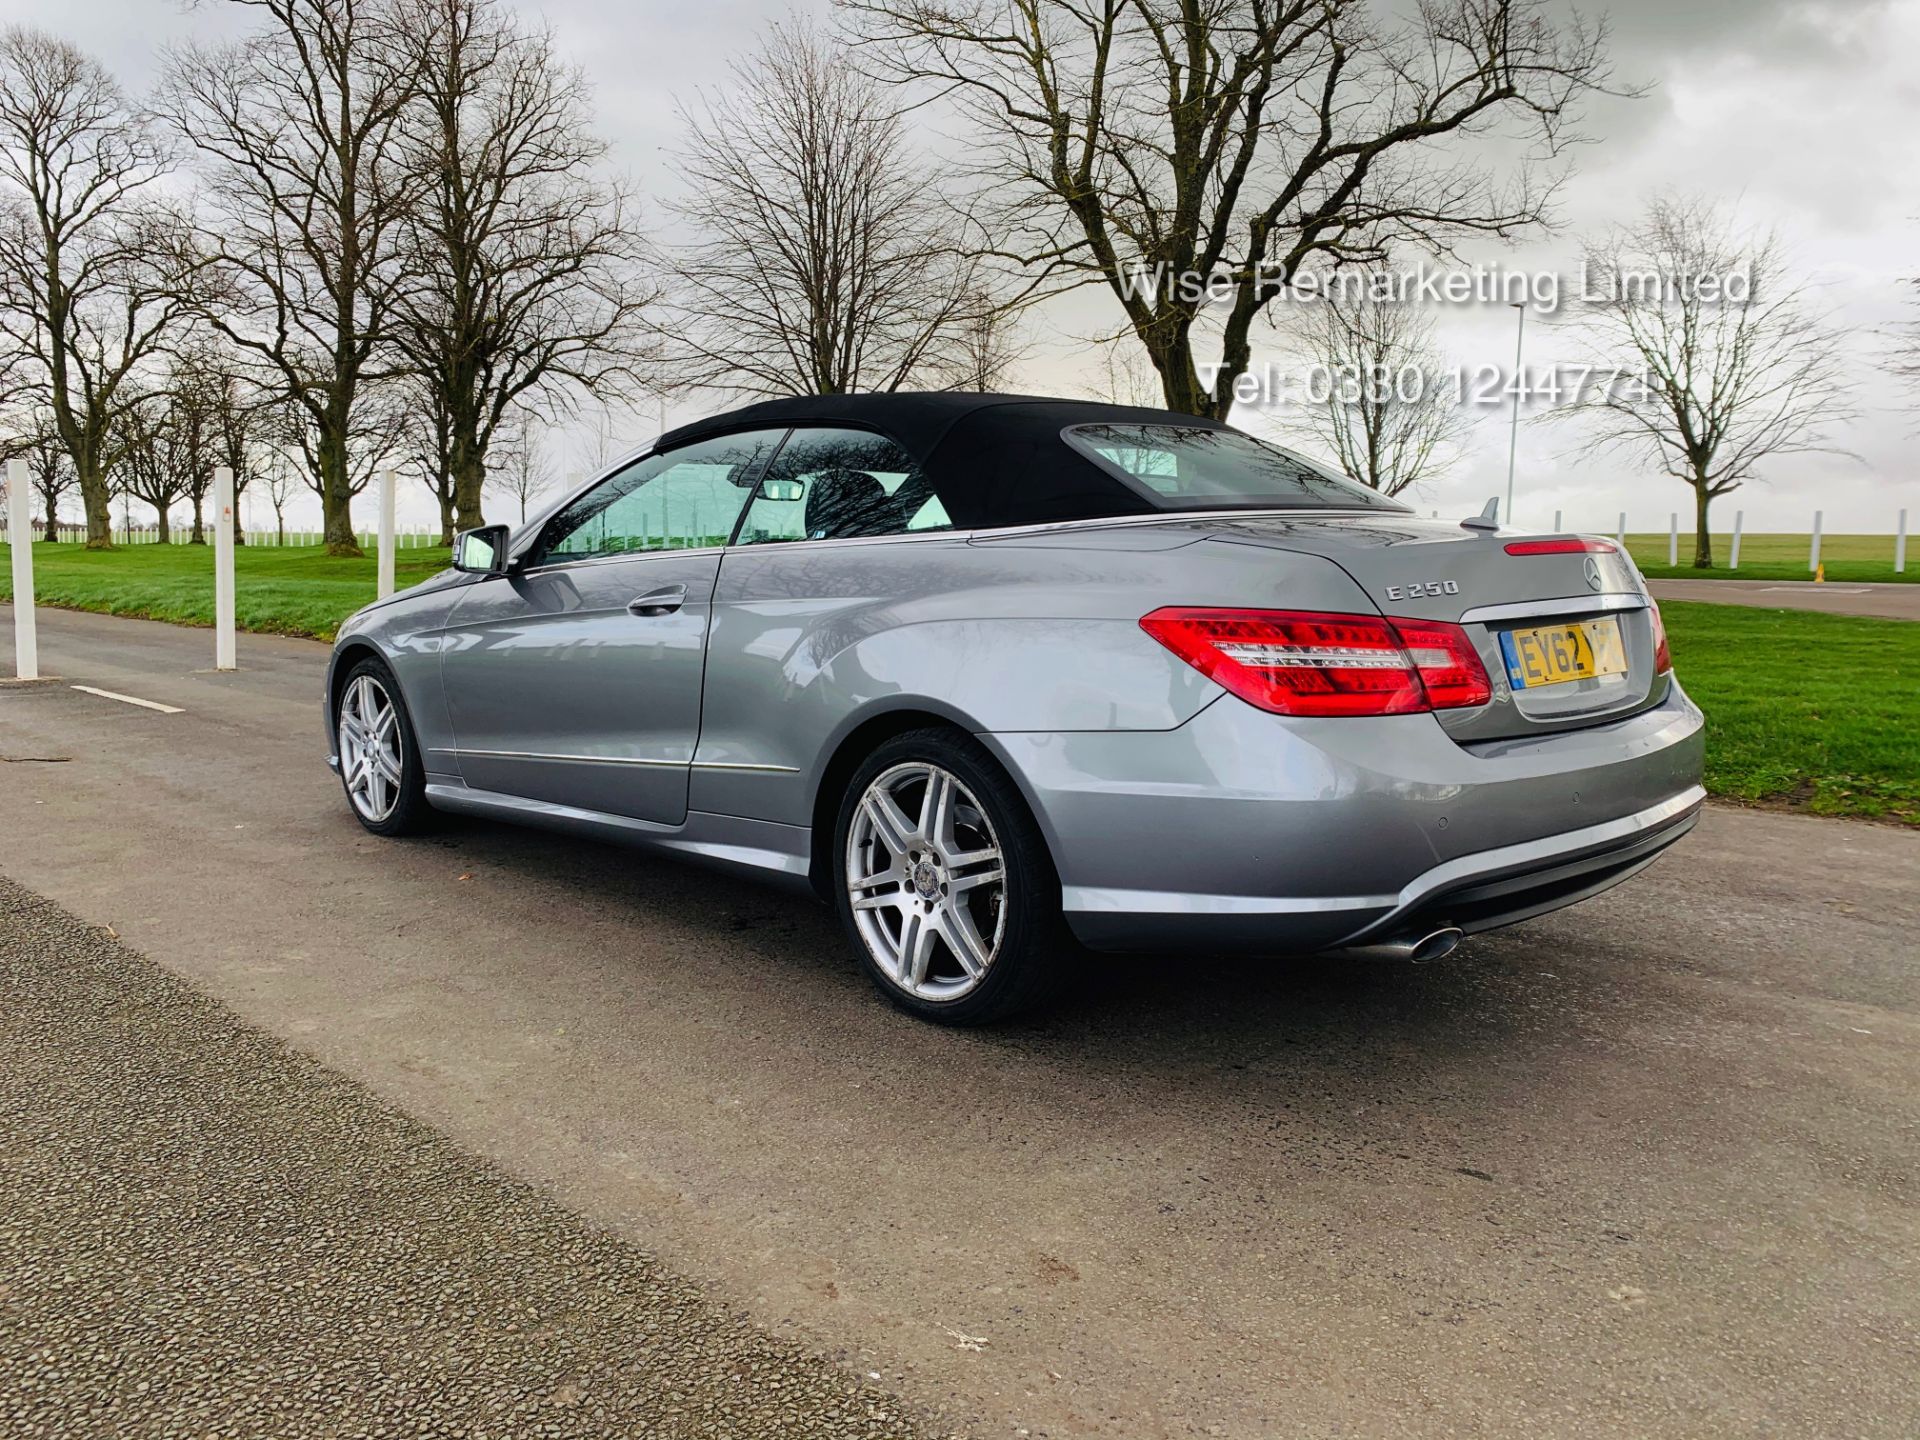 Mercedes E250 CDI Convertible Sport Tip Auto - 2013 Model - Service History - Leather - Parking aid - Image 4 of 27